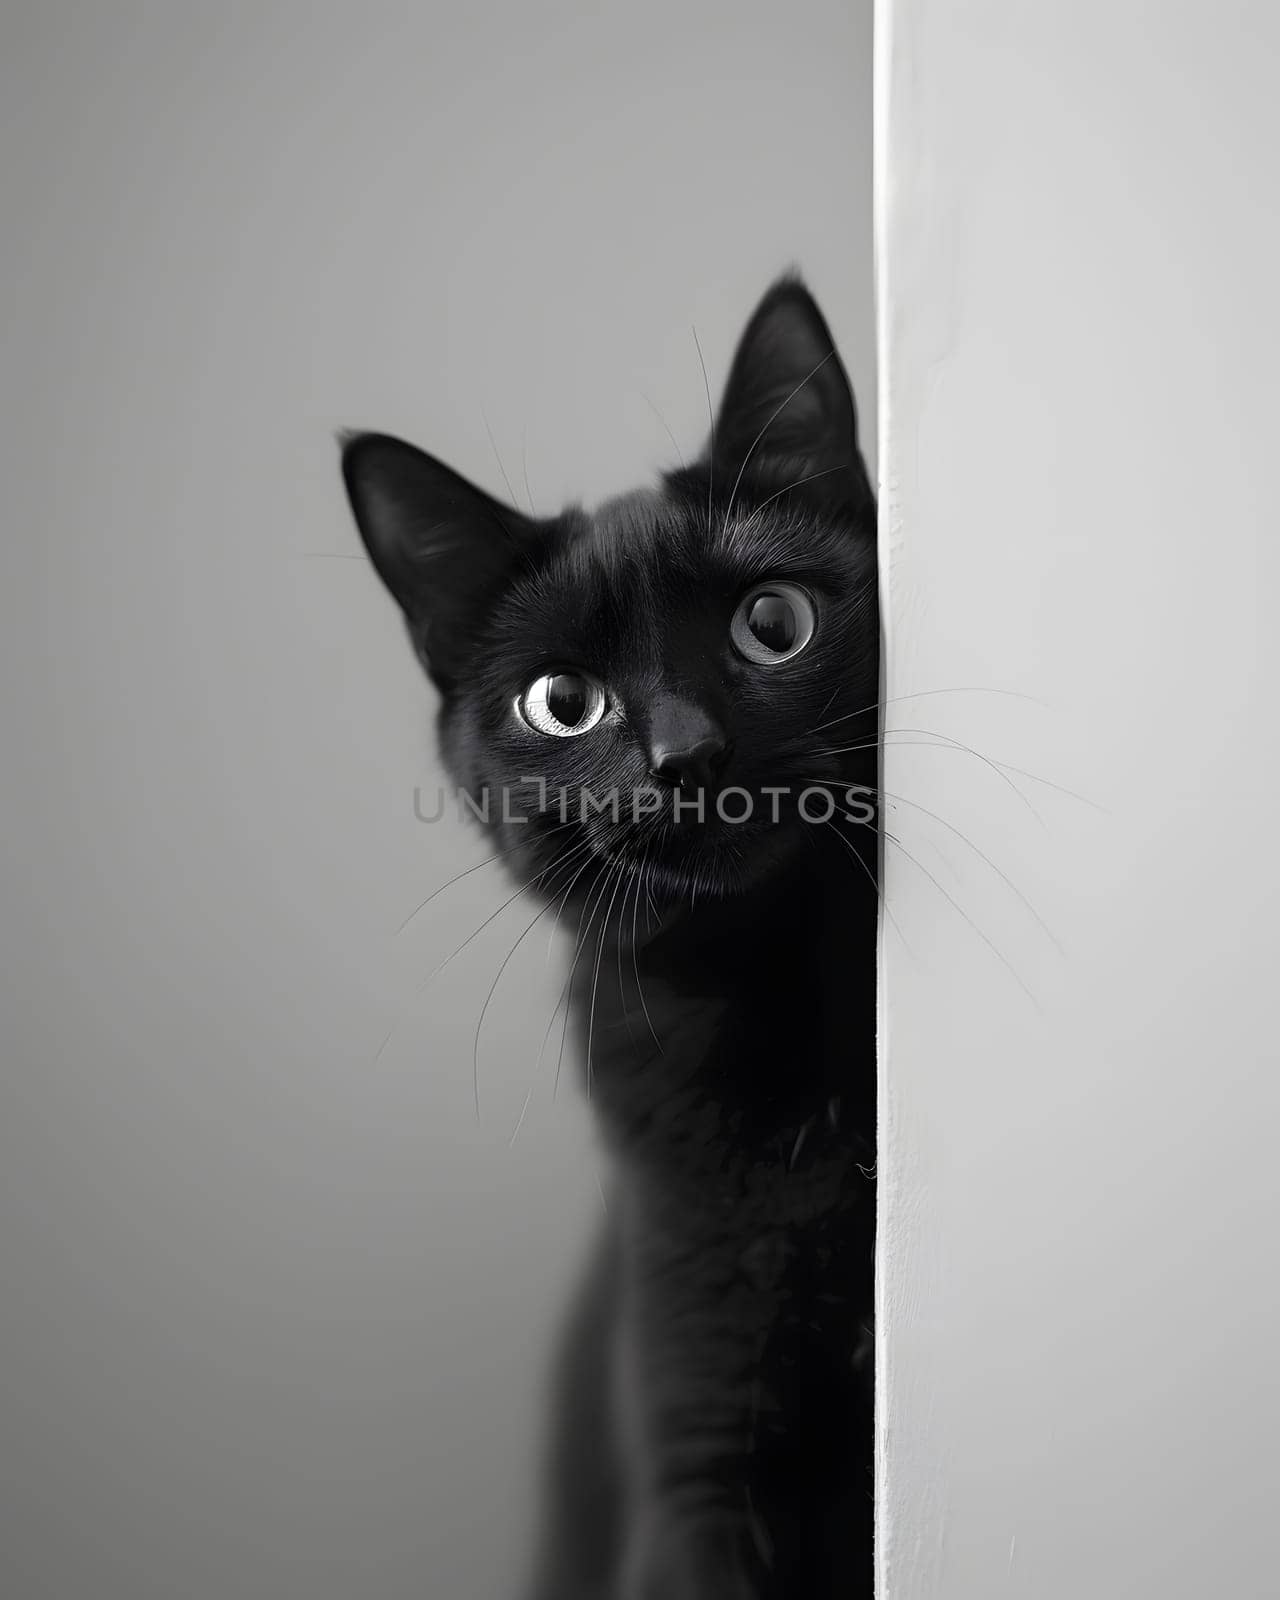 A small to mediumsized grey Cat, from the Felidae family, with whiskers and a snout, is peeking out from behind a white wall in a monochrome photography style